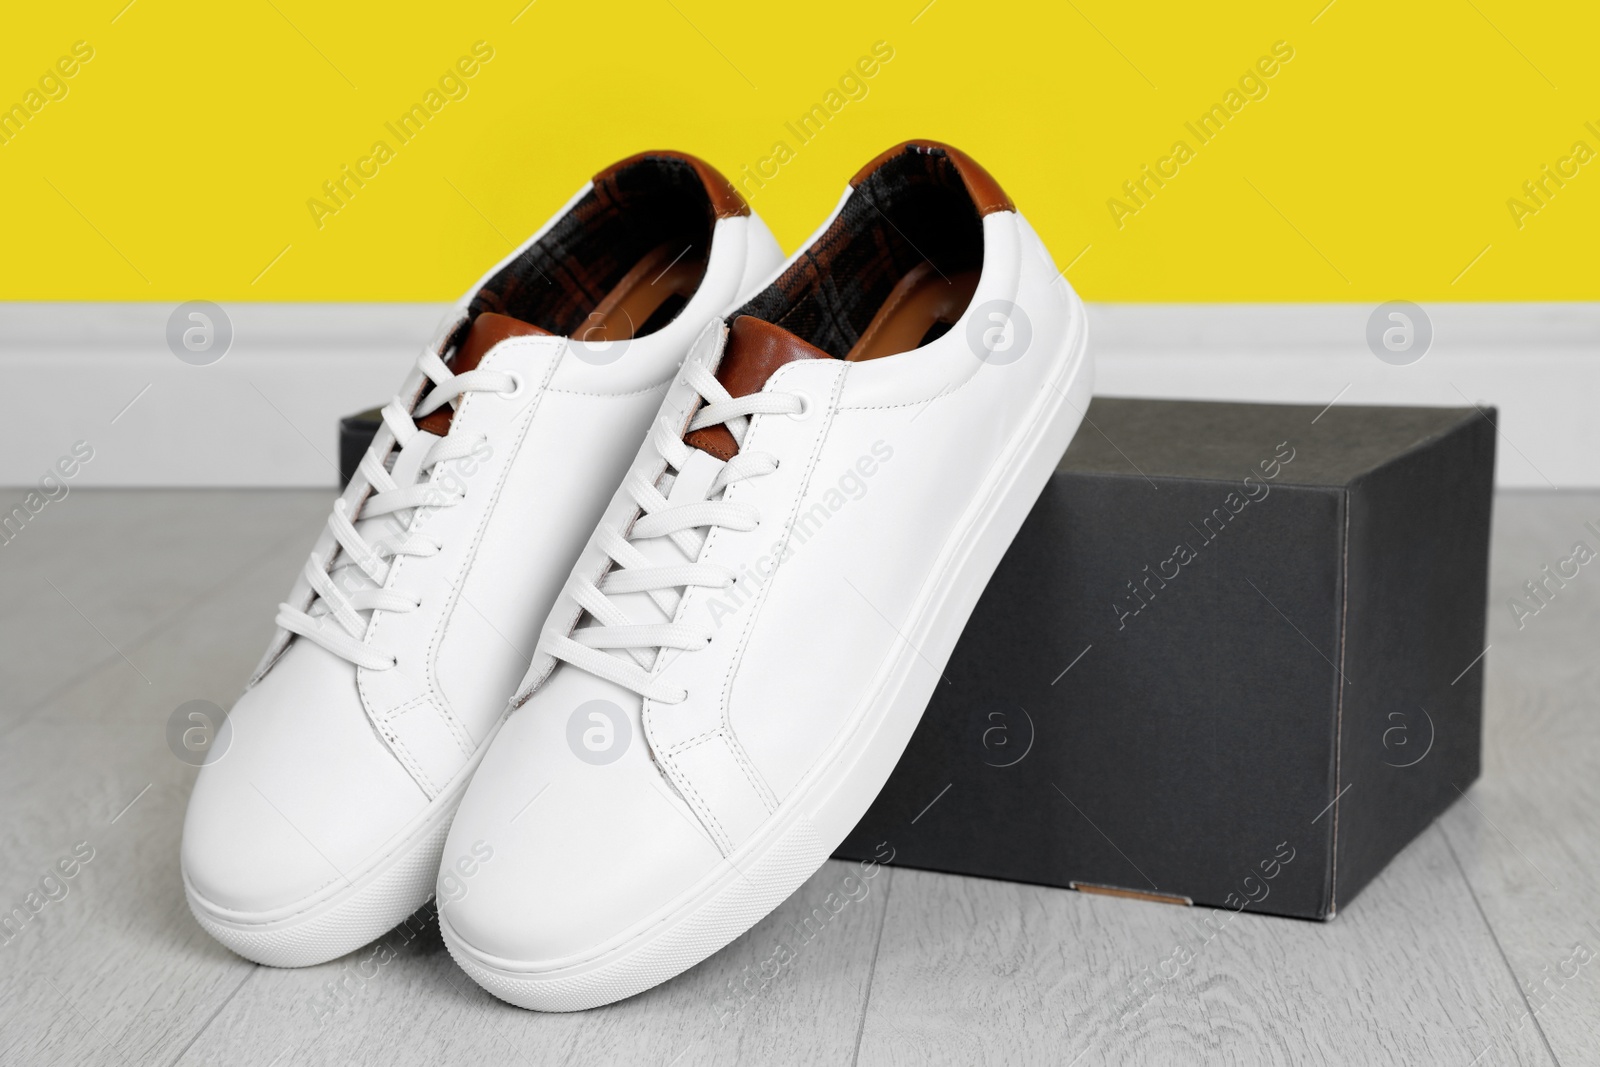 Photo of Pair of stylish sports shoes near cardboard box on floor indoors